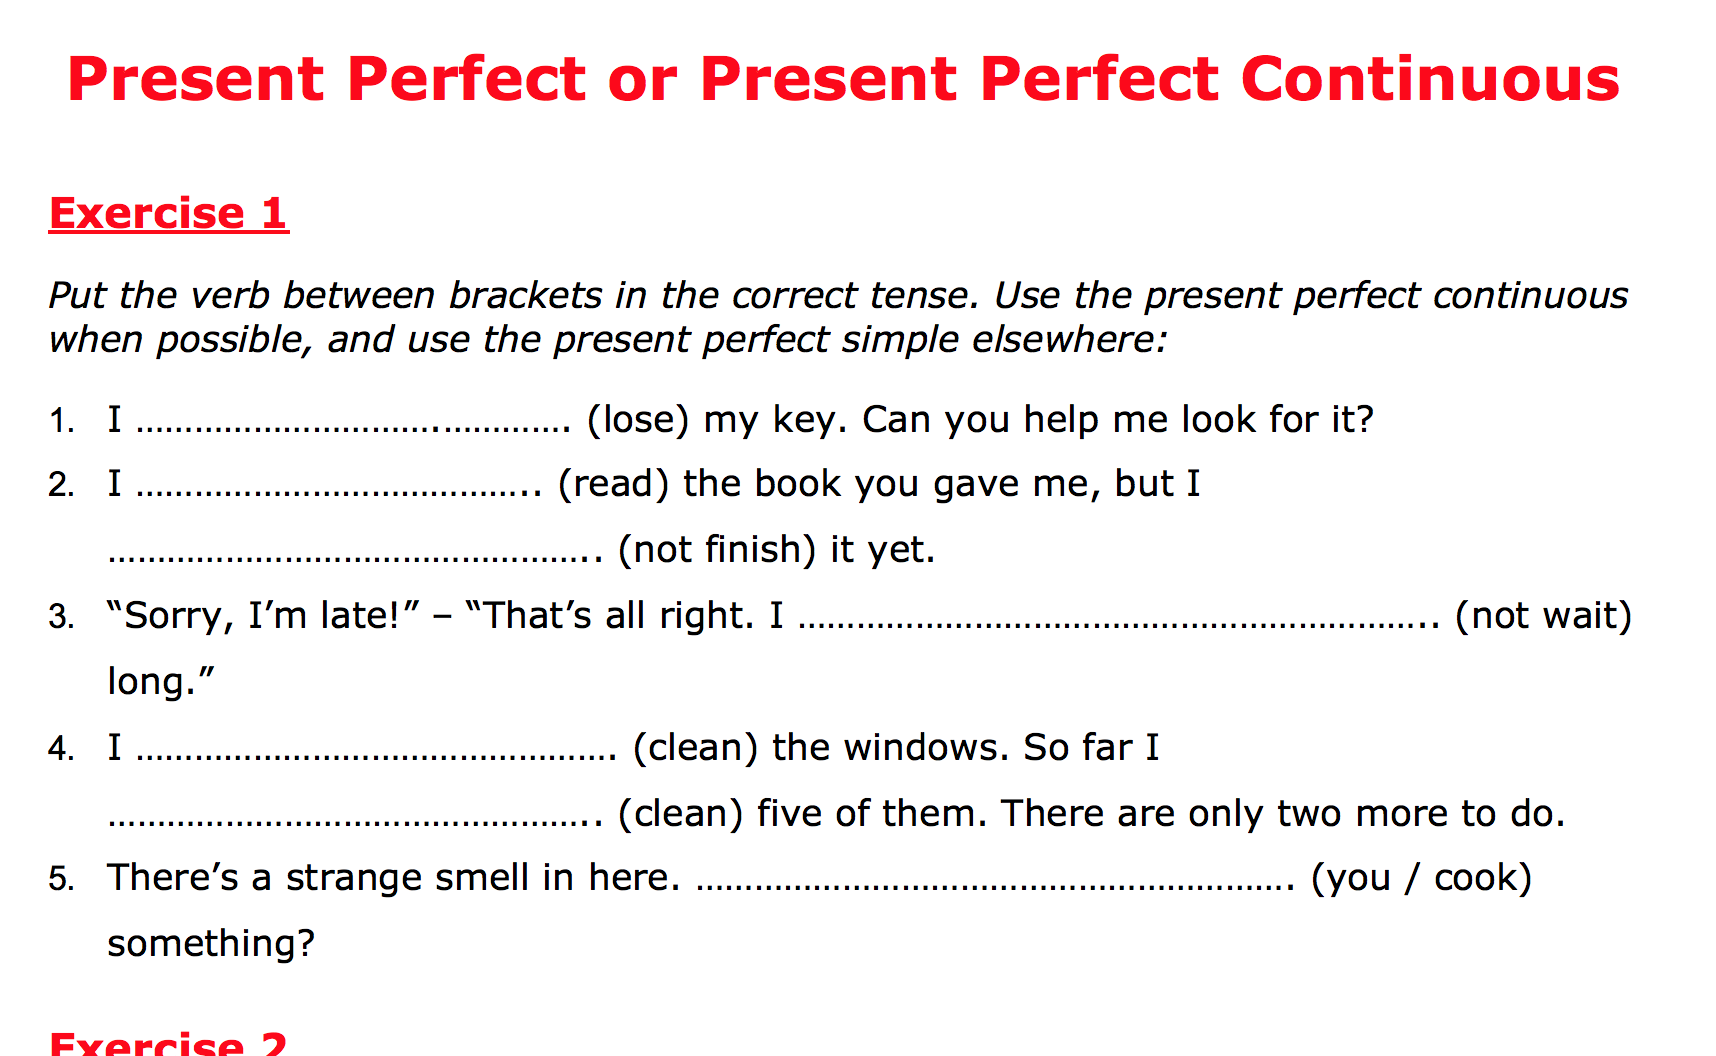 Present Perfect Continuous And Simple Exercises - BEST GAMES WALKTHROUGH